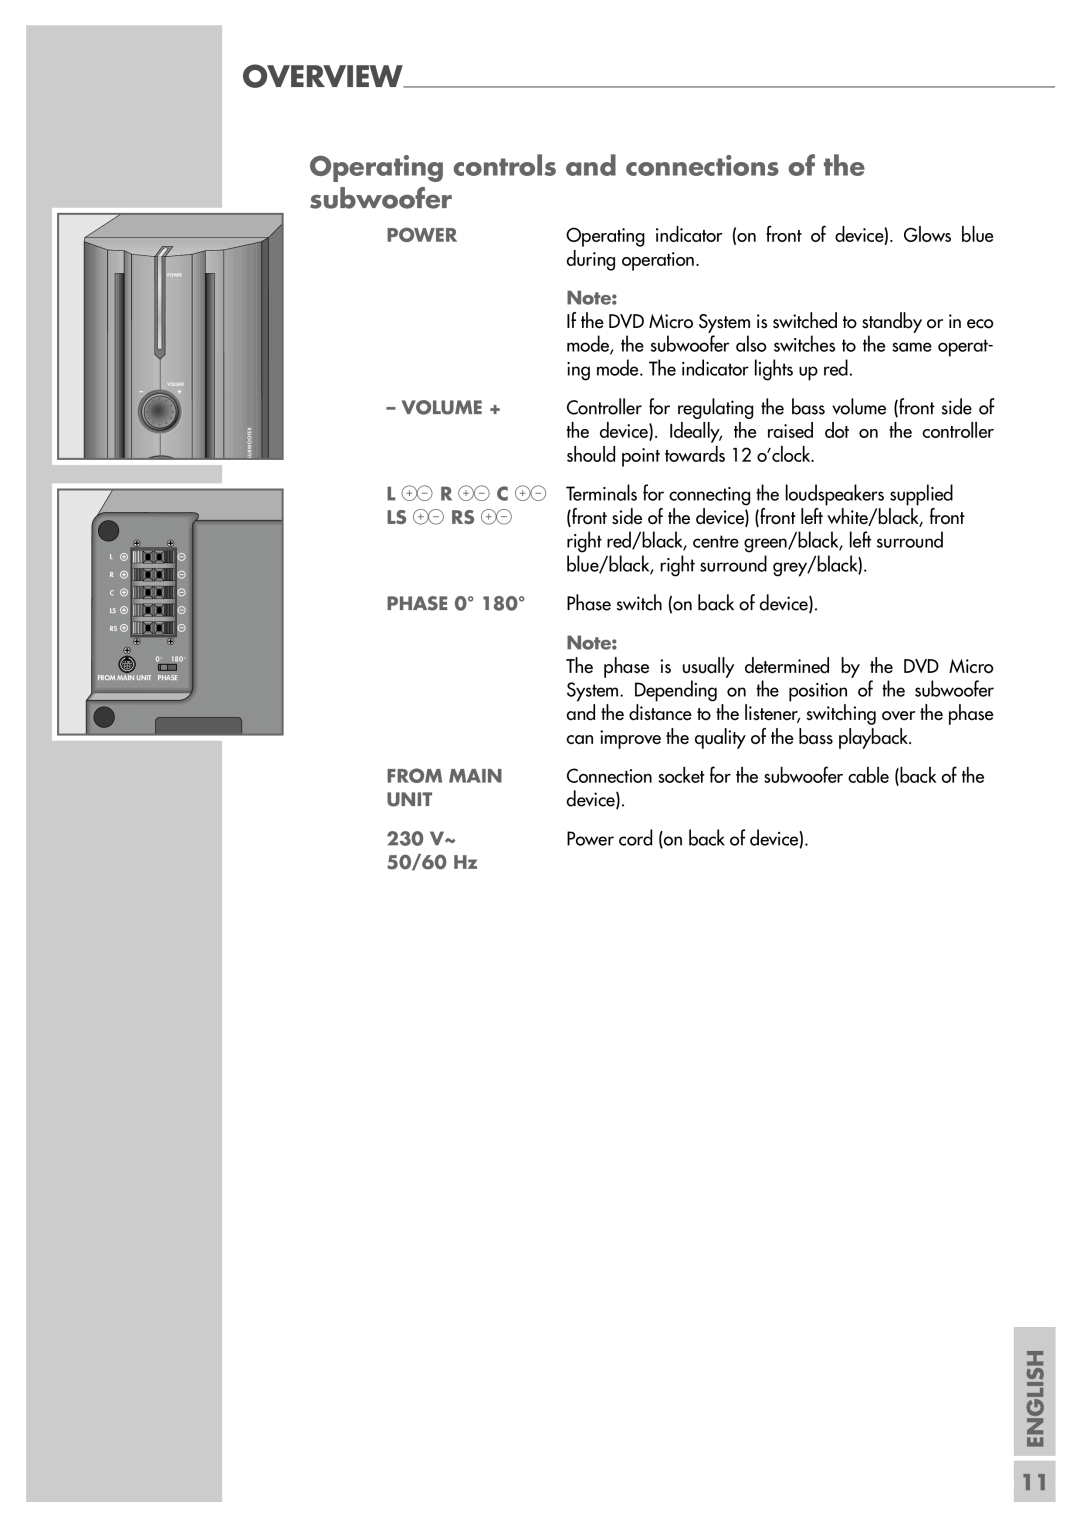 Grundig Scenos UMS 6400 DVD manual Operating controls and connections of the subwoofer, English, during operation 